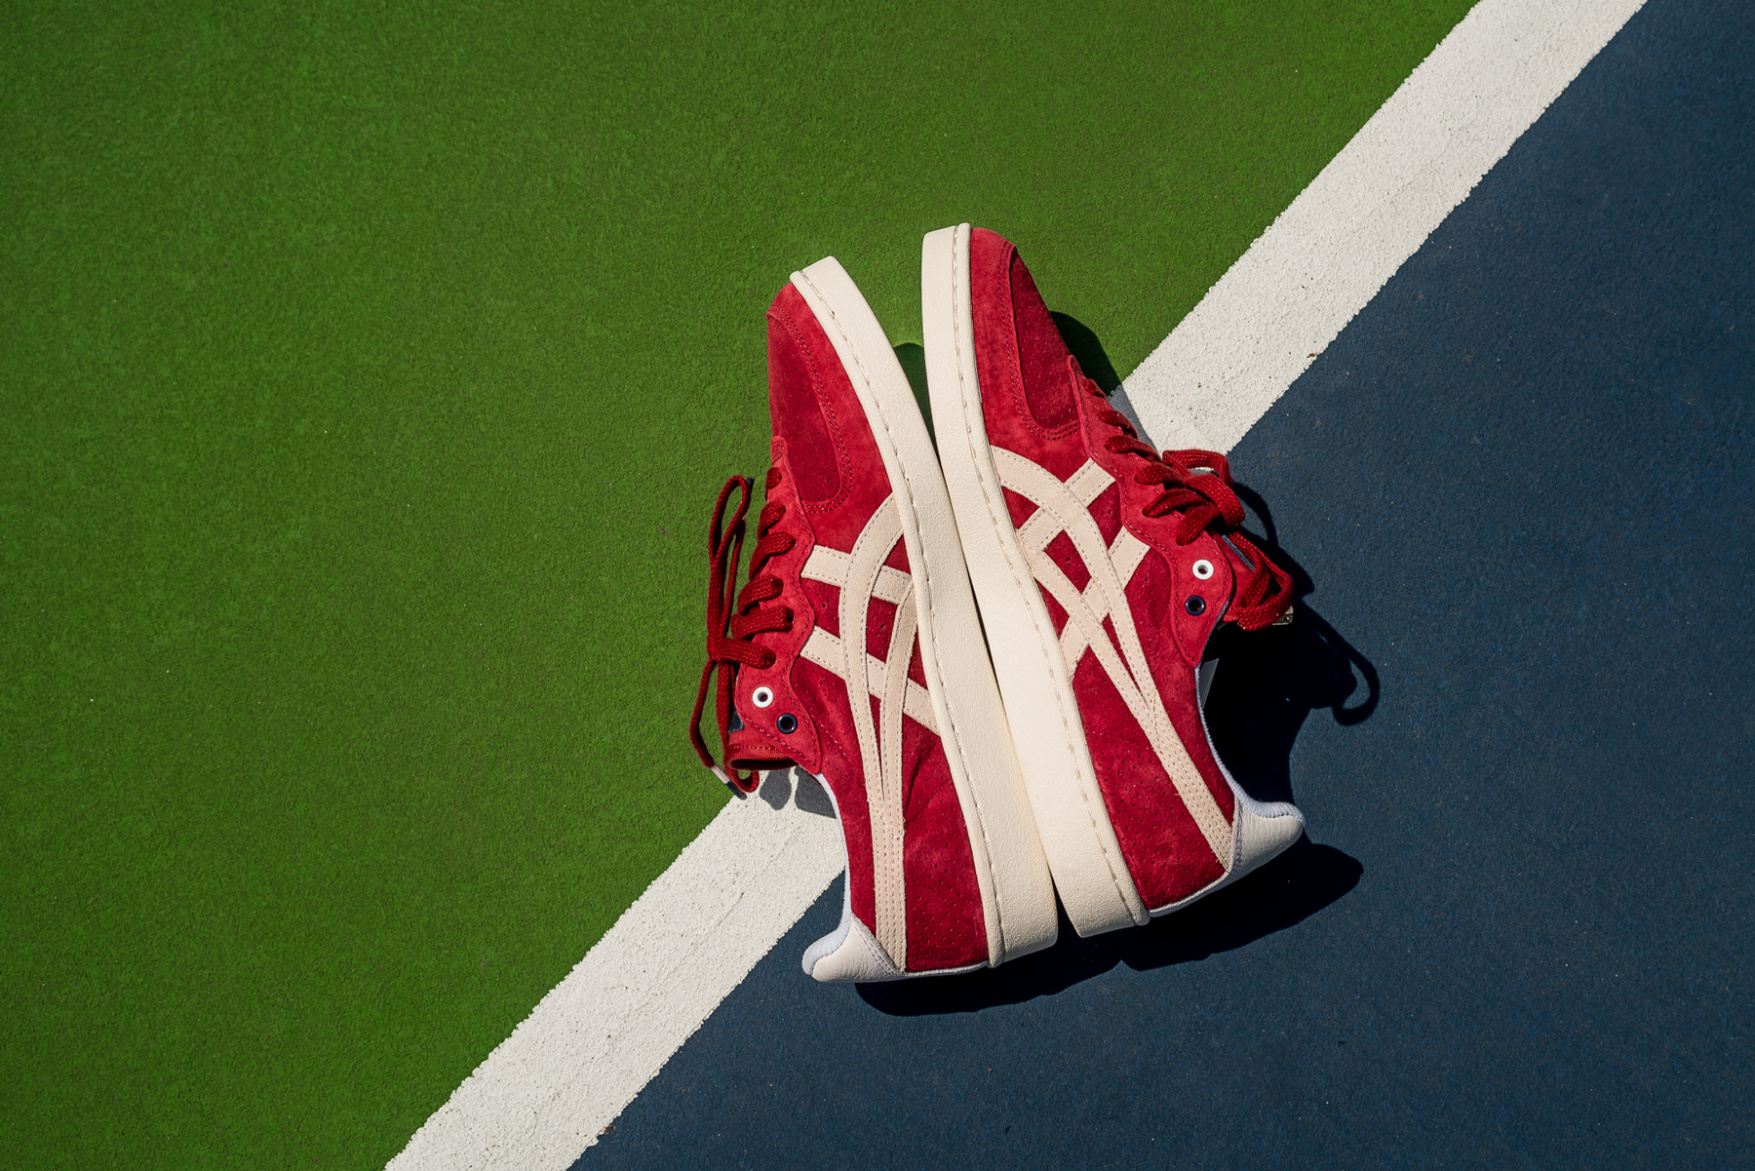 parker-shoes-asics-game-set-match-tennis-sneaker-collection-14